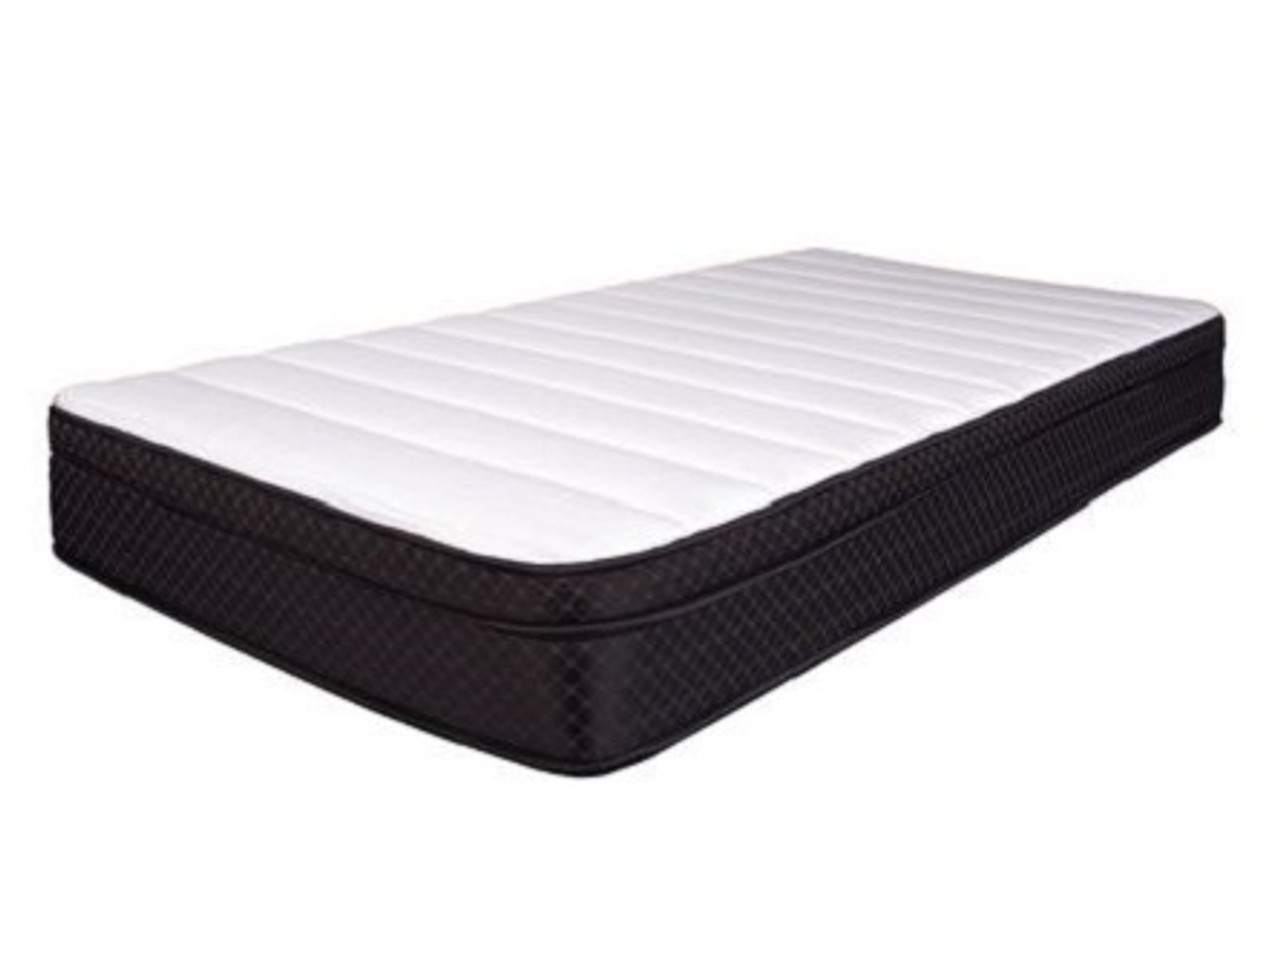 ObusForme MTE-GL8-QN ObusEssentials Gel Series -8”  MEDI-GEL cooled bed in the box Mattress, Queen